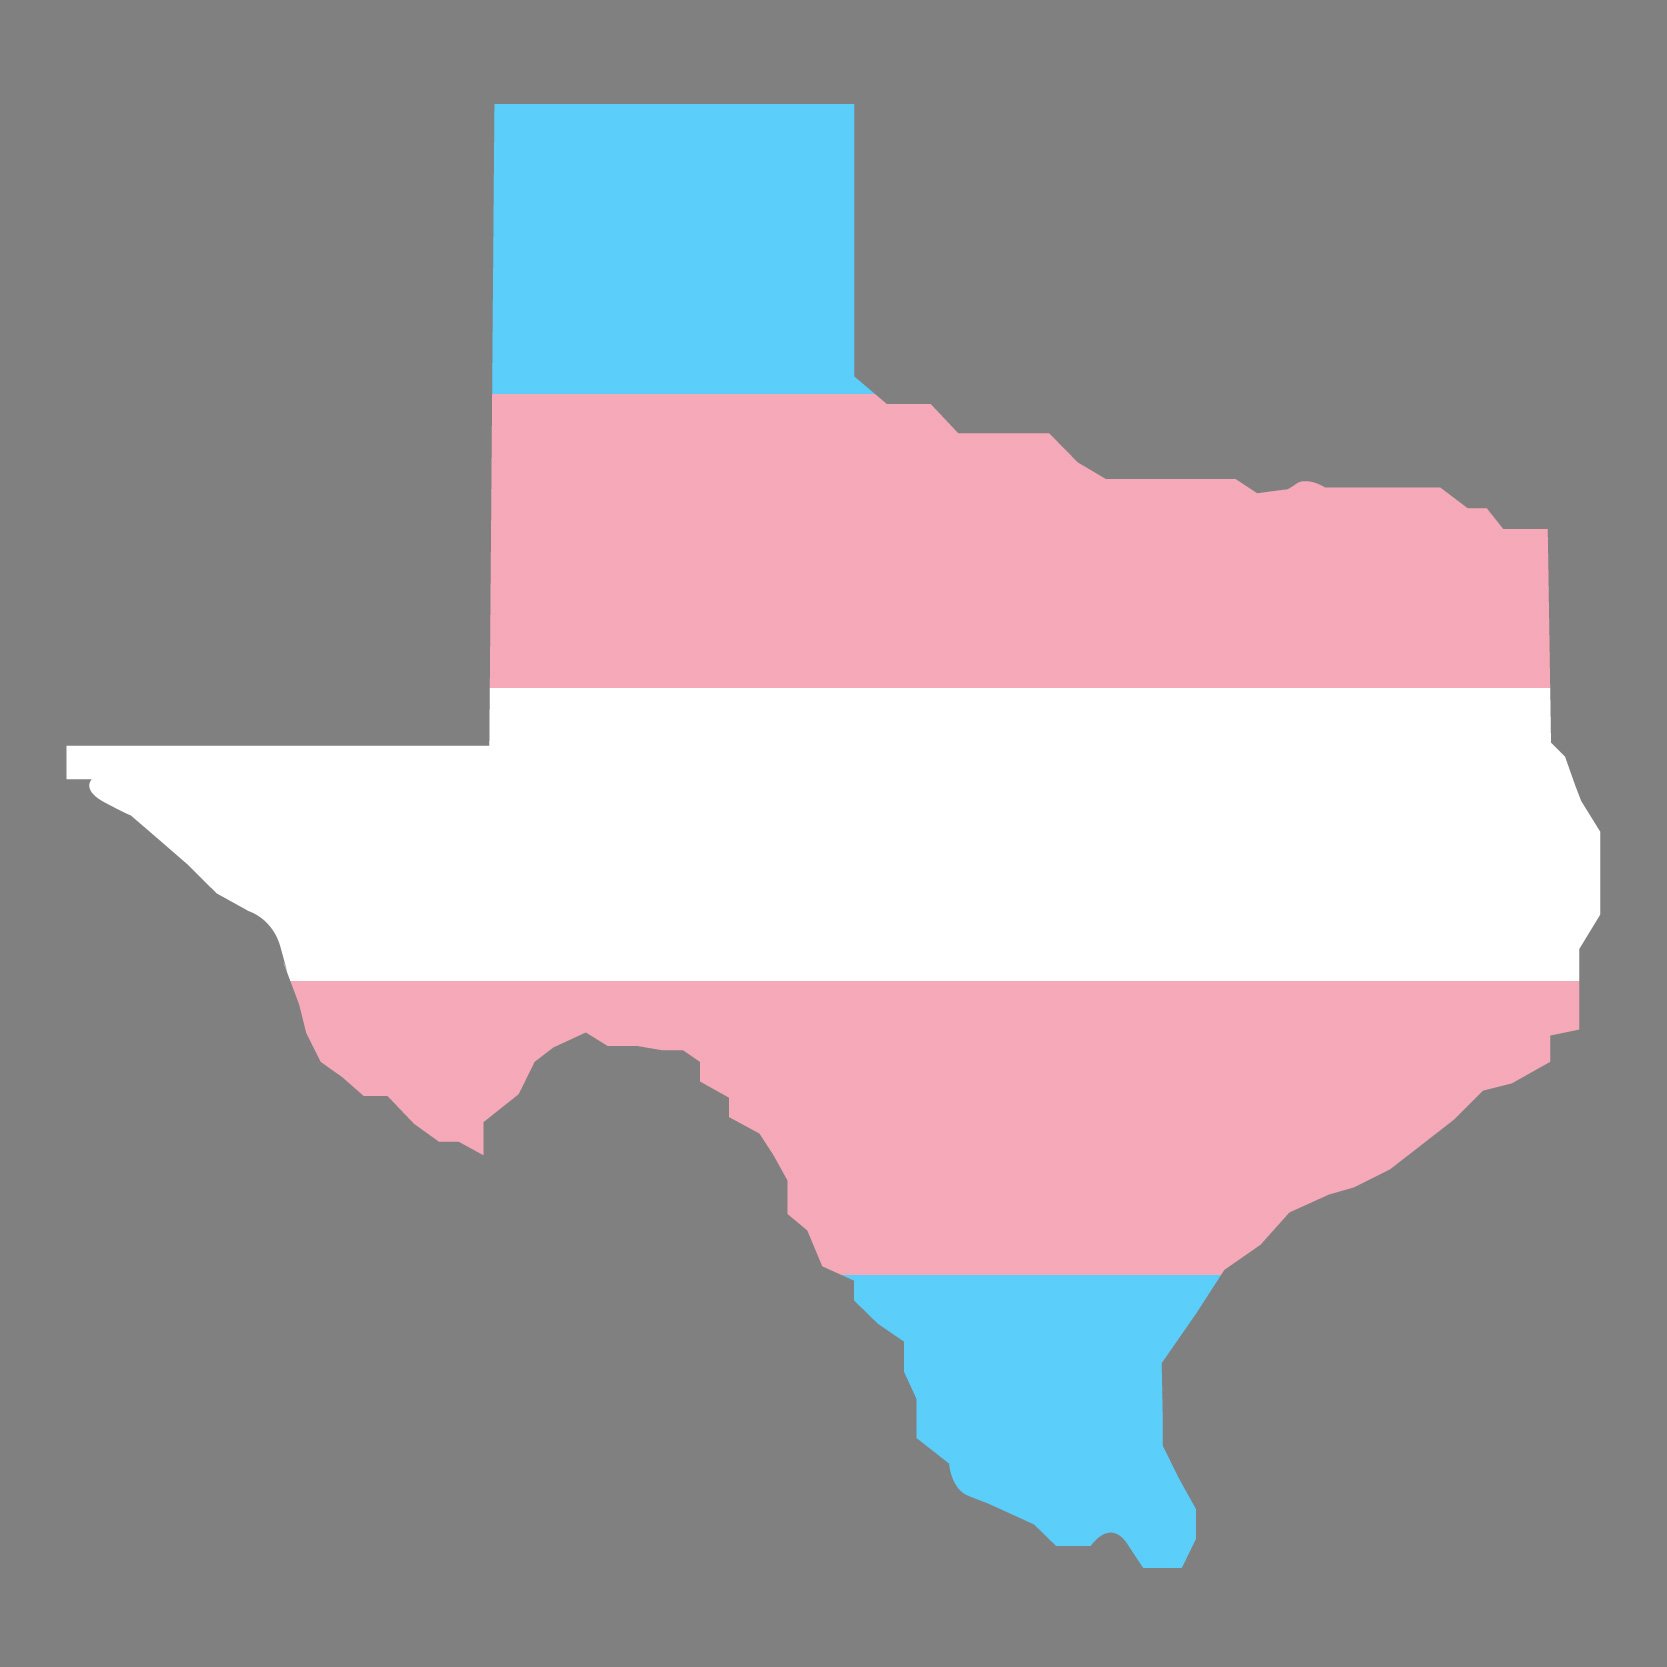 Advocating health for transgendered persons.  Come attend a symposium to train medical, legal, mental health, and educational providers of West TX.